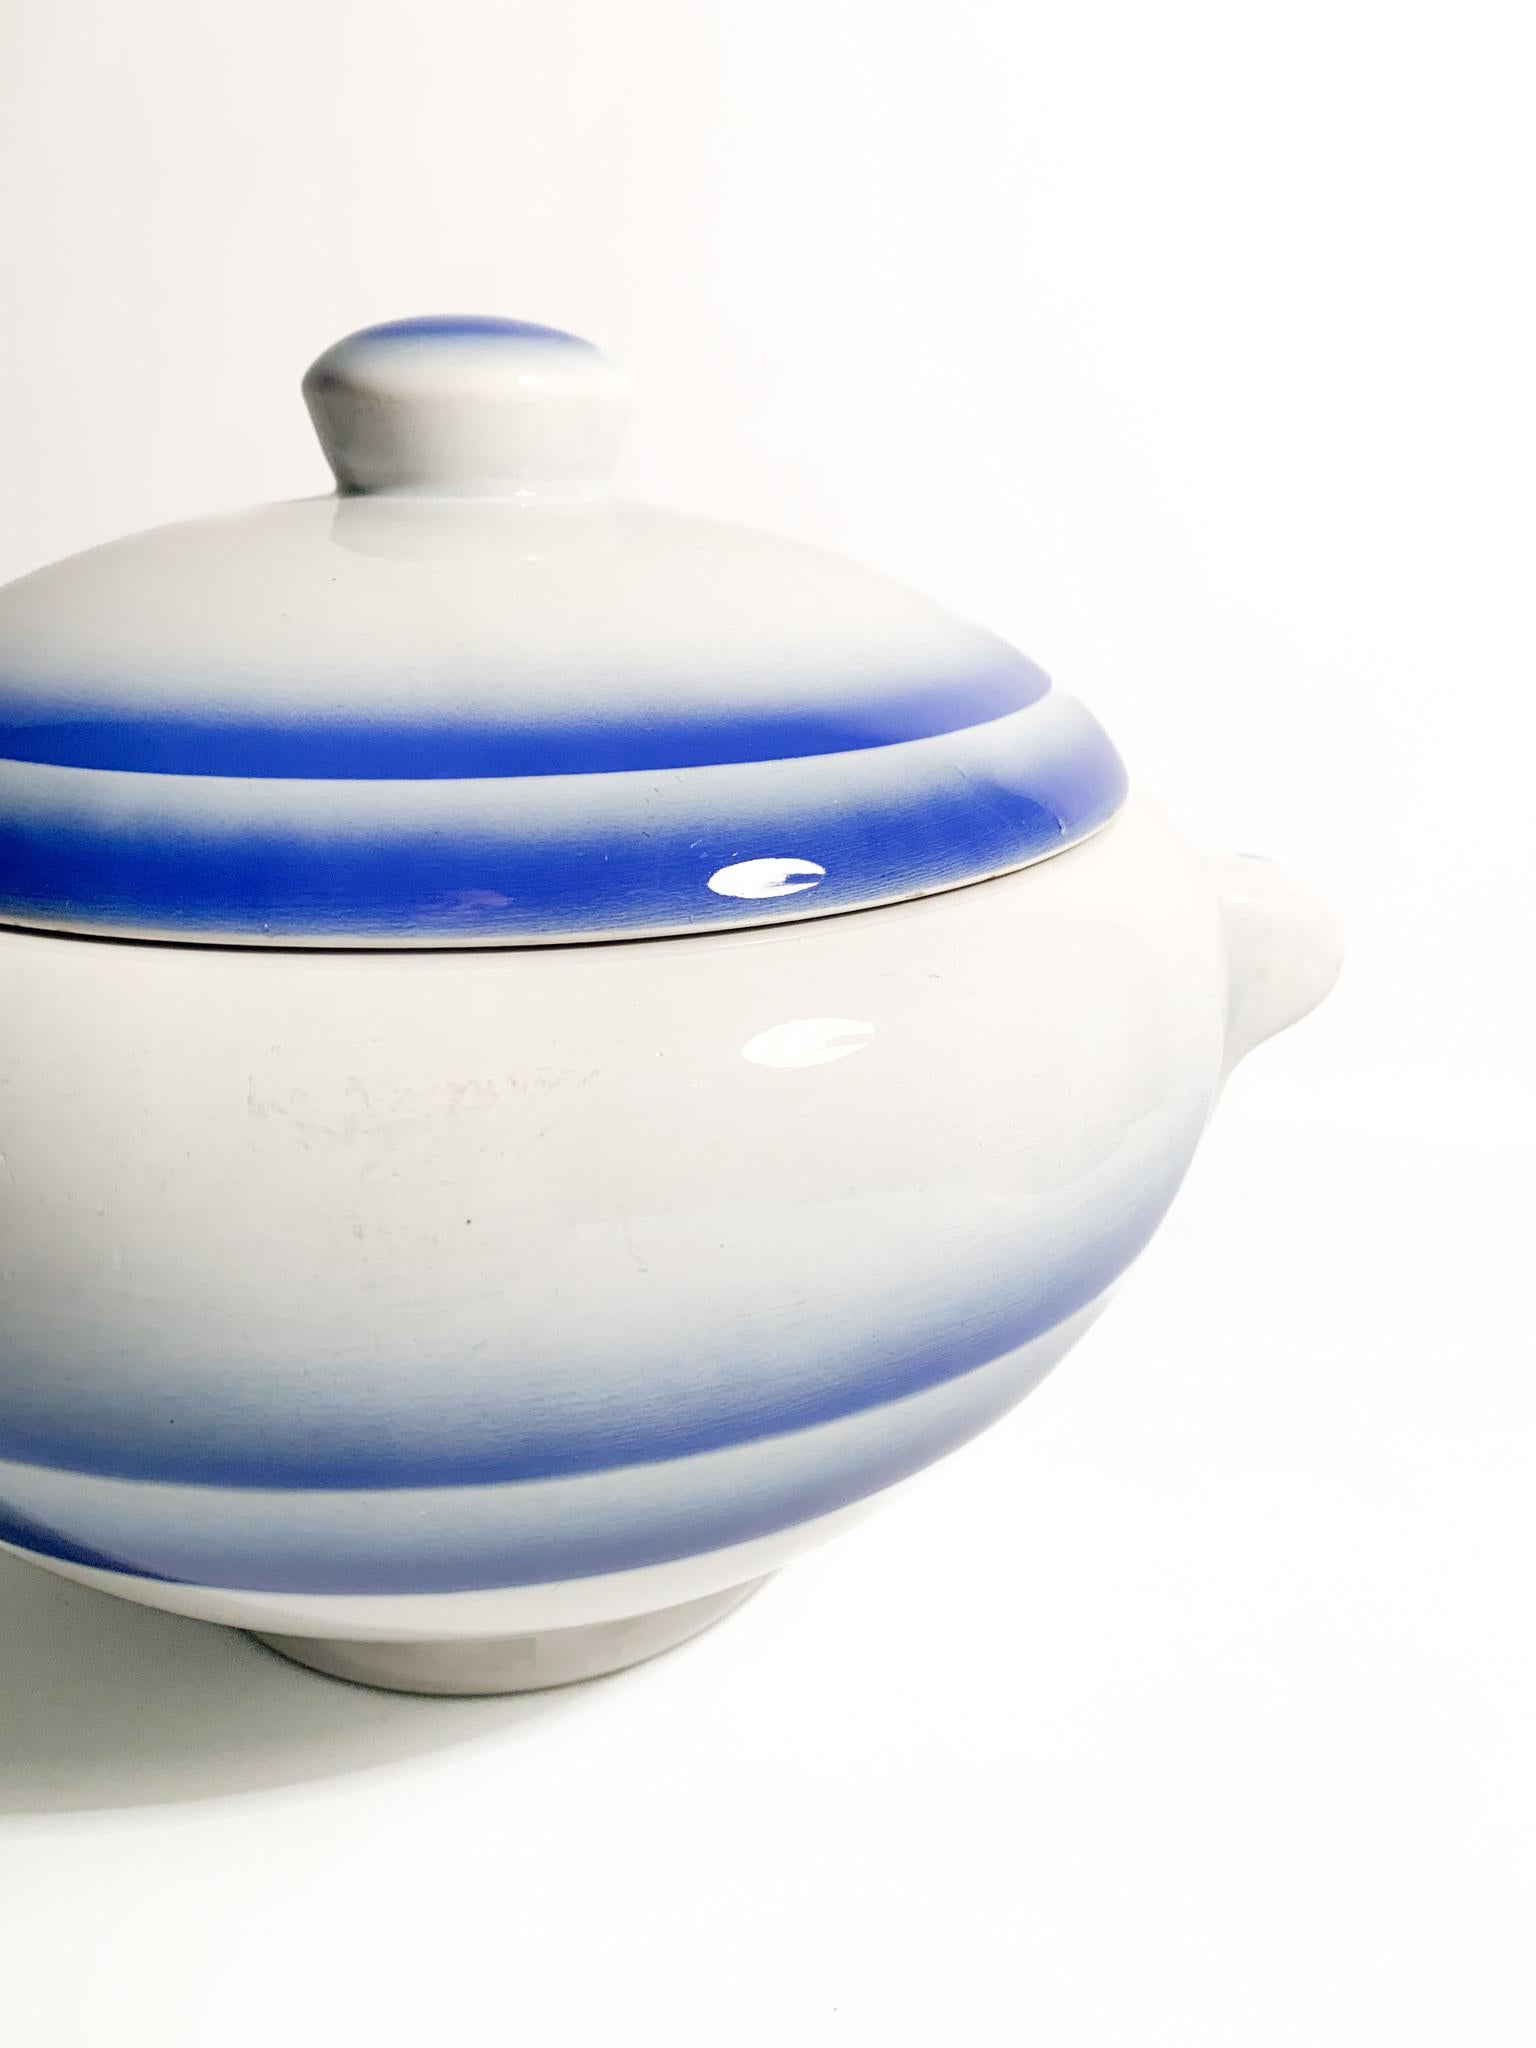 Art Deco White and Blue Ceramic Centerpiece Tureen by Galvani Pordenone from the 1950s For Sale